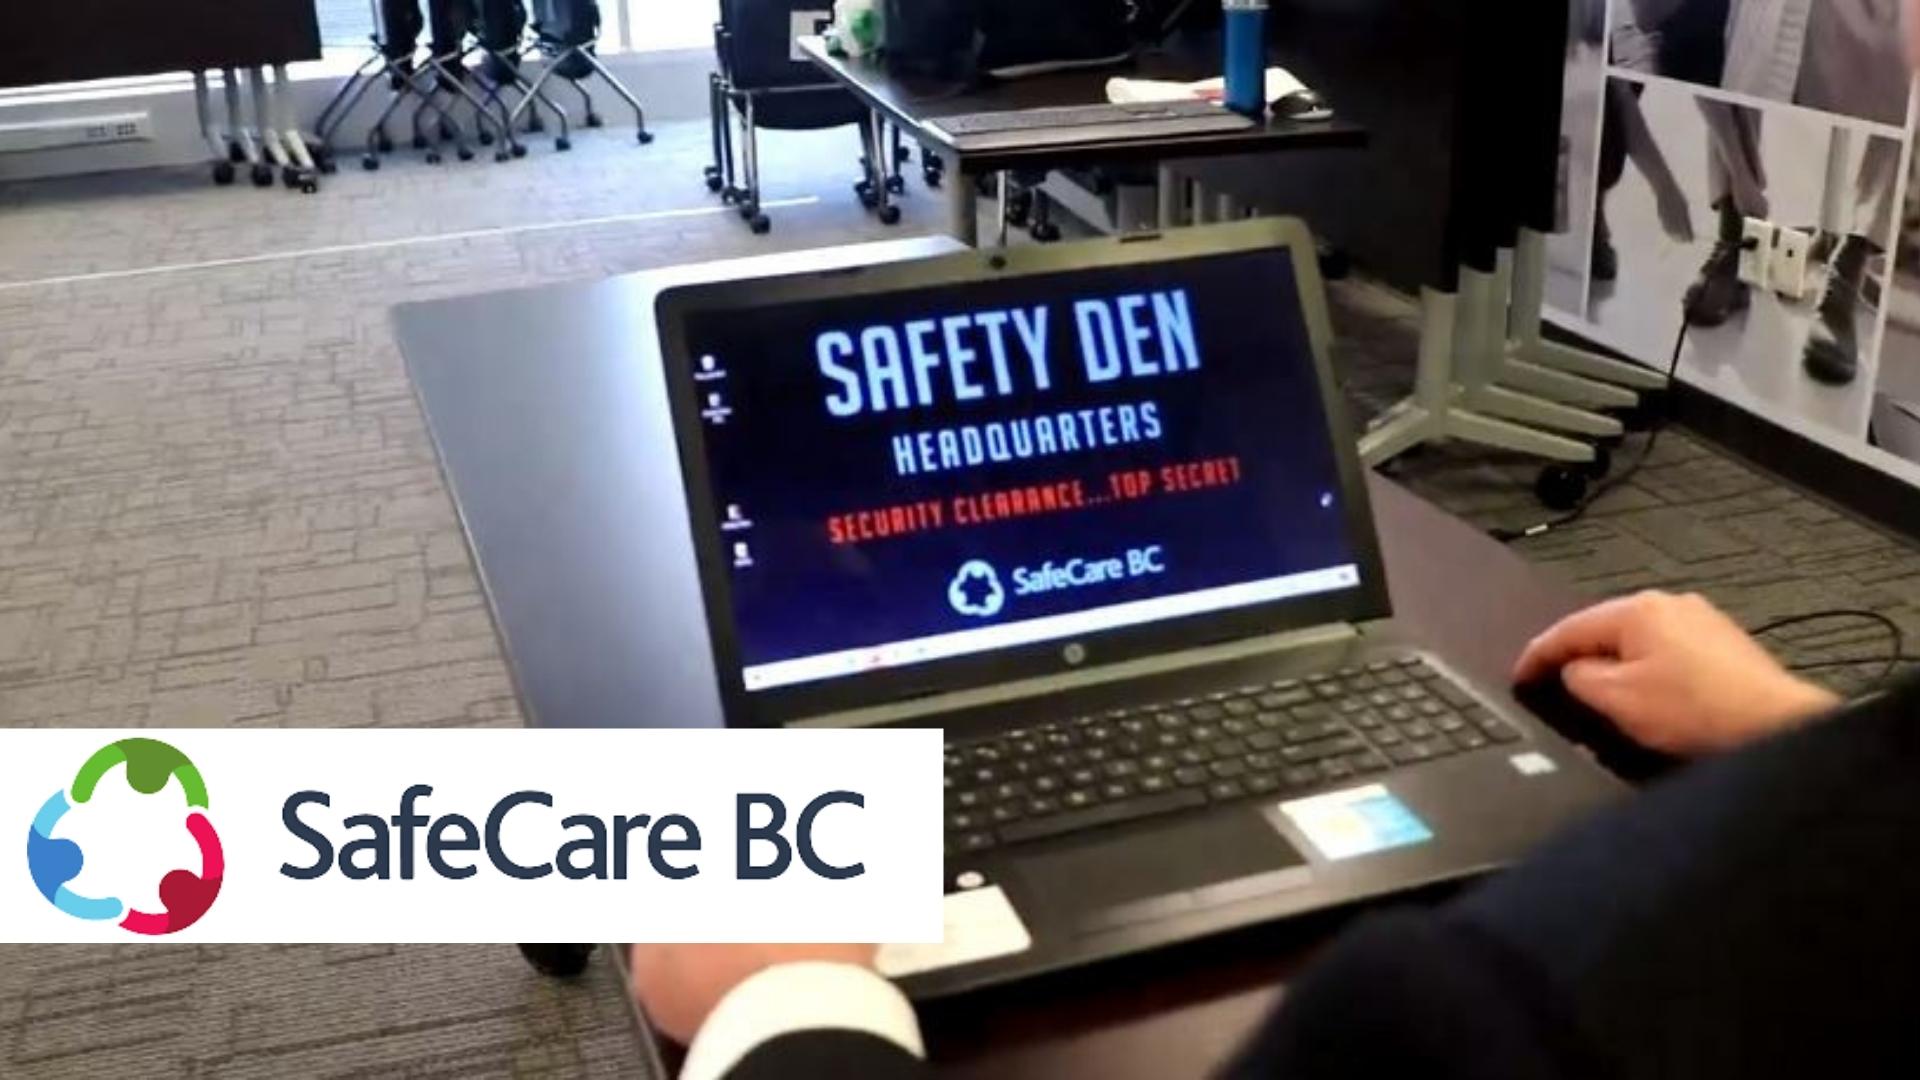 Safecare BC’s Safety Den will be back for #BCCPA2022 Annual Conference